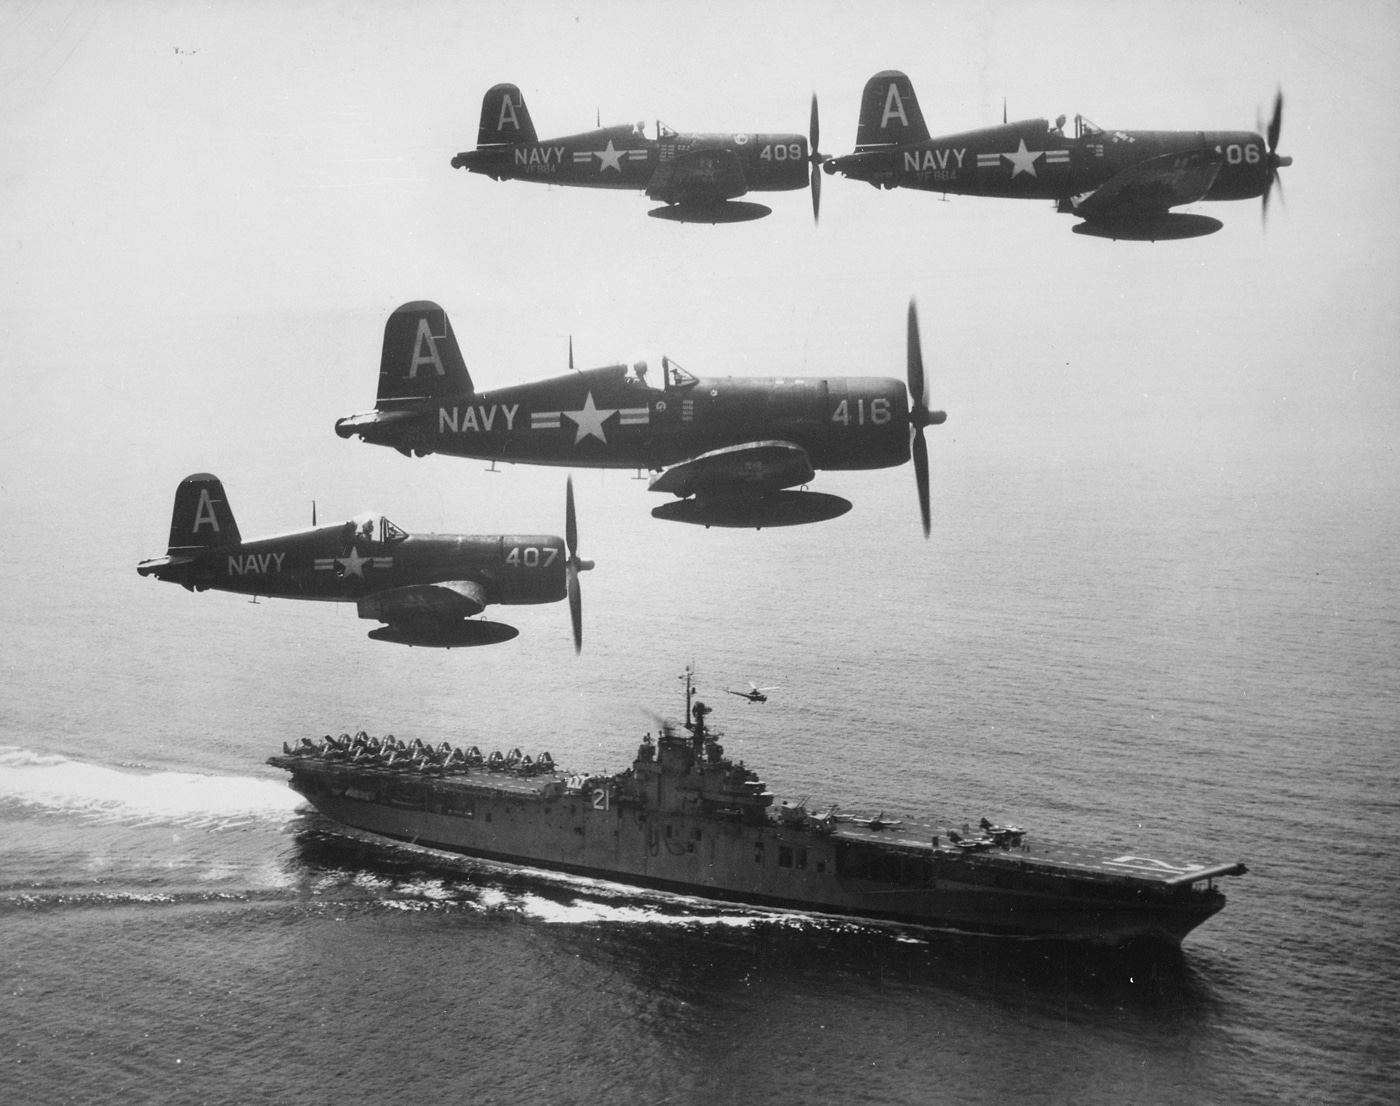 F4U Corsair fighters return from a mission over Korea